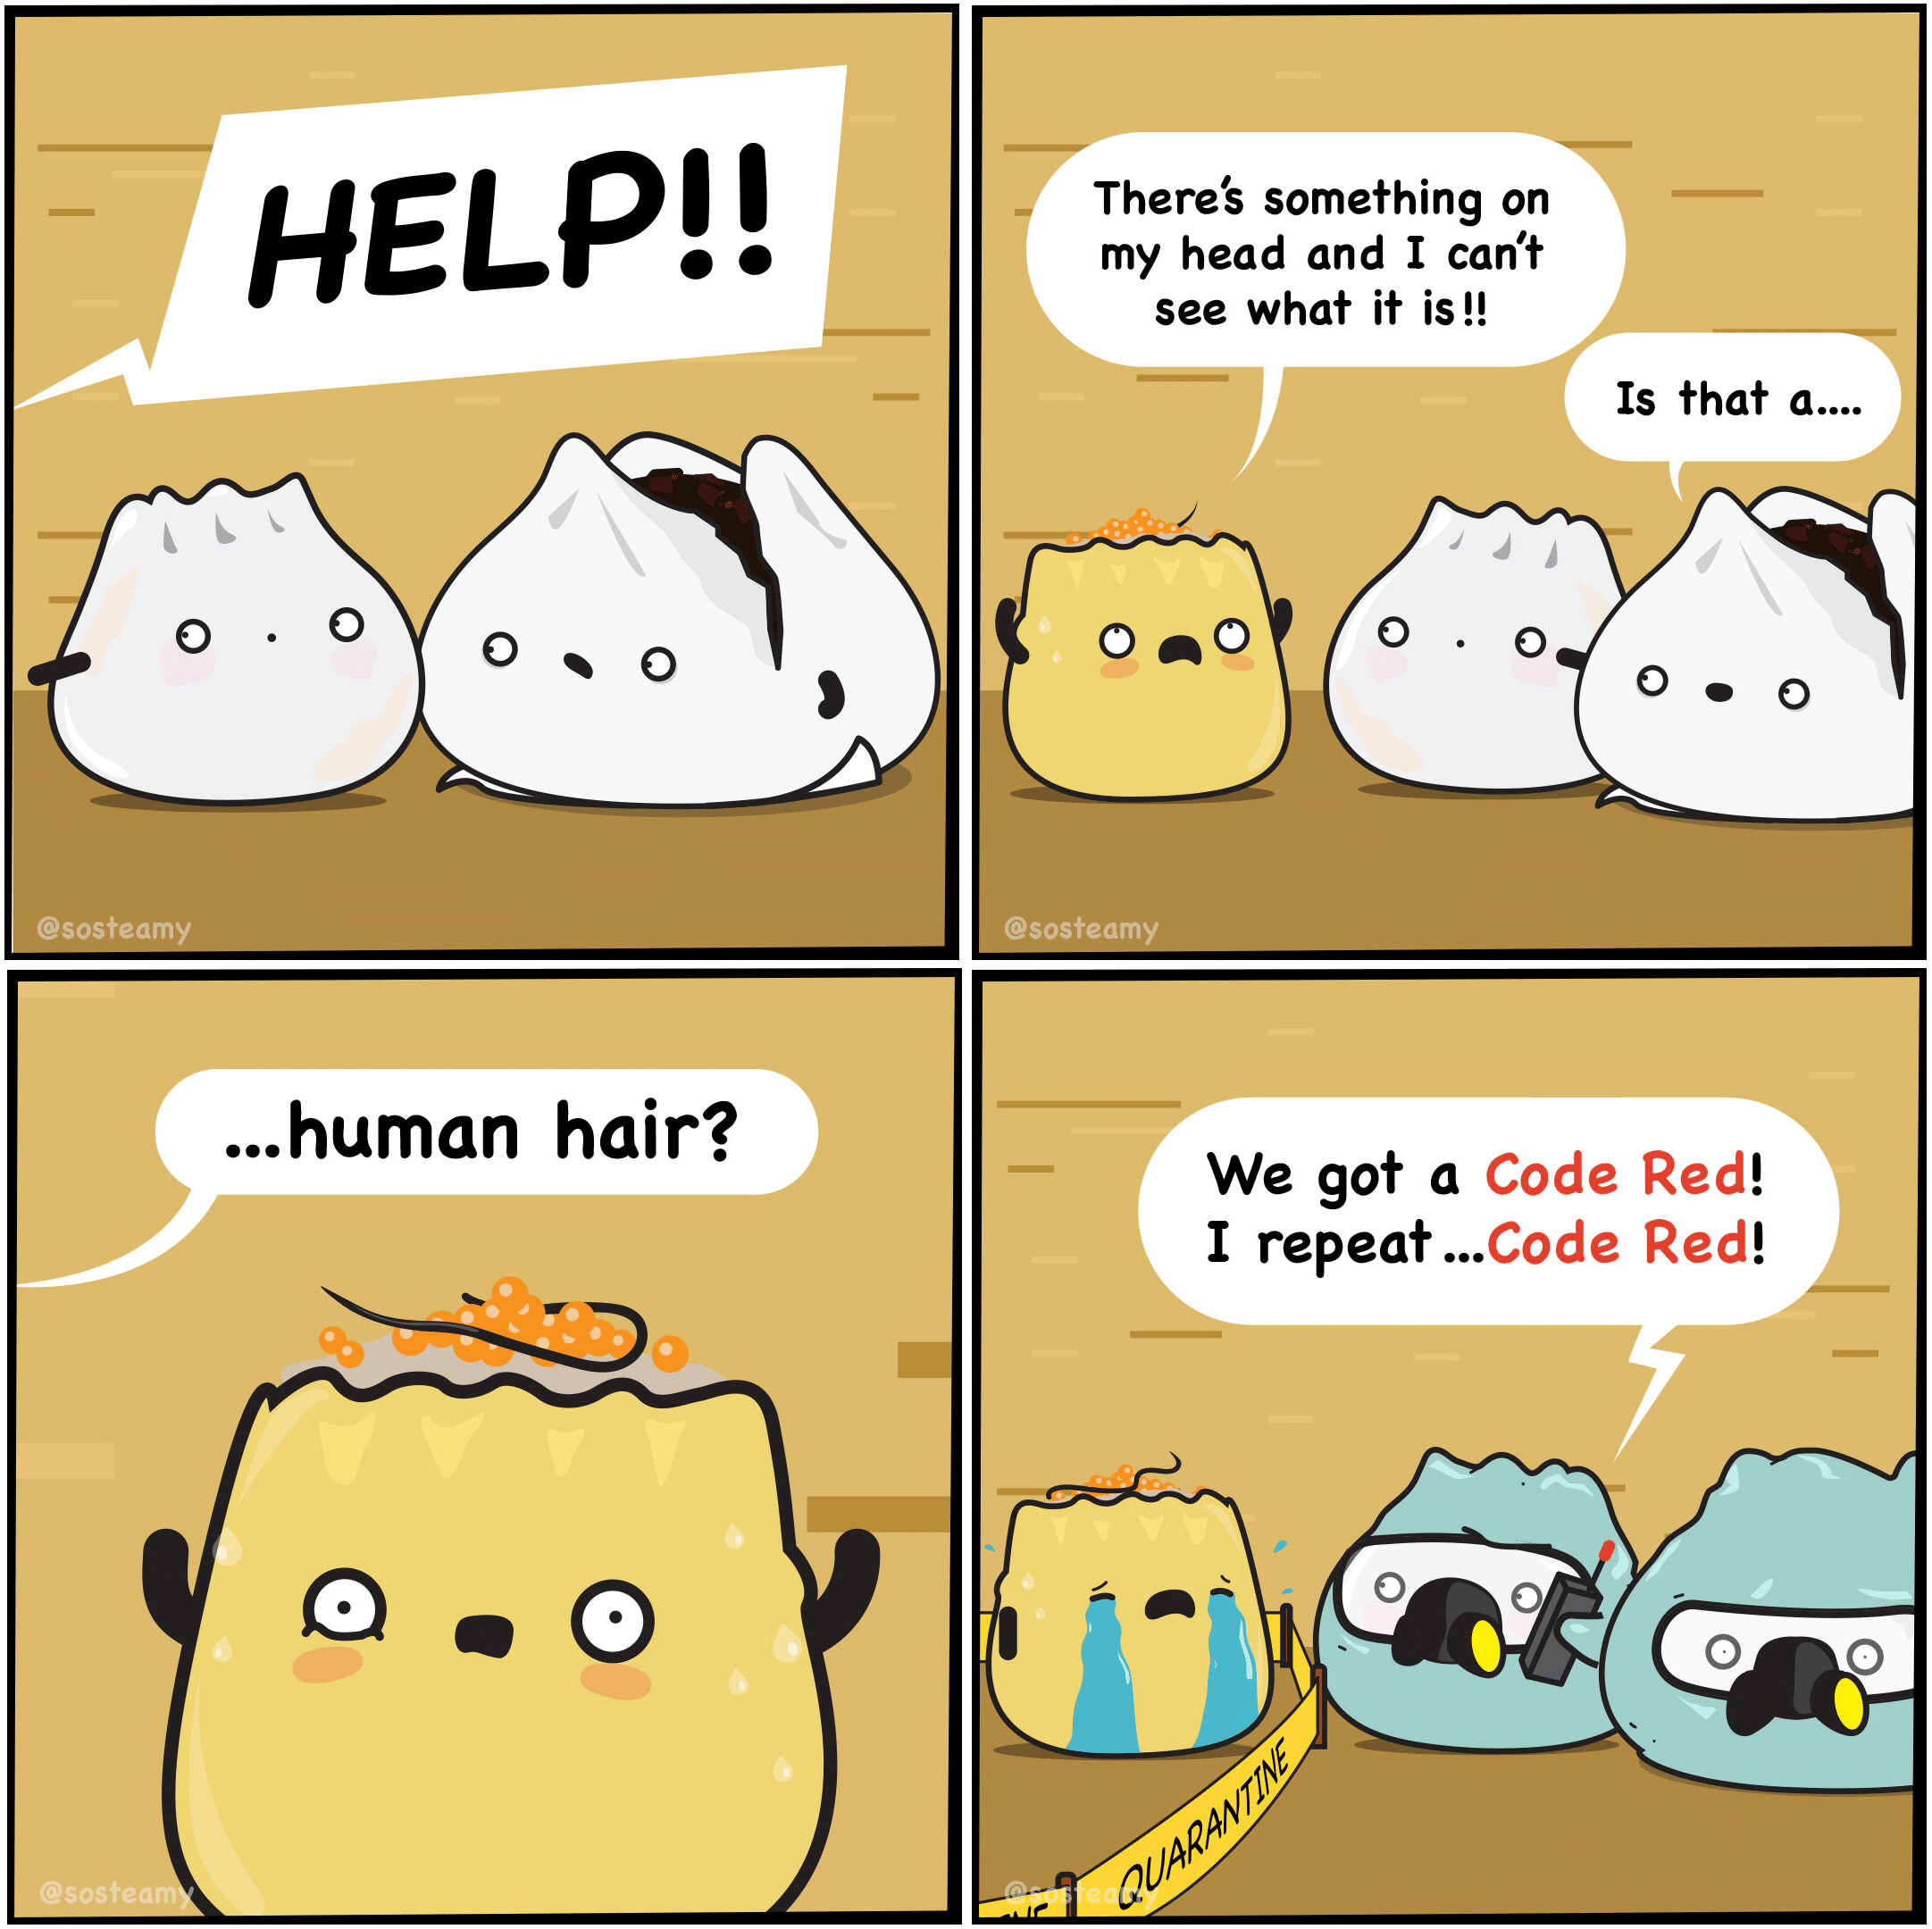 comics comics comics text: HELP!! steam ...human hair? There' something on my head and I can't see what it is!! steam We got a Code Red I repeat ...Code Red O O O O 